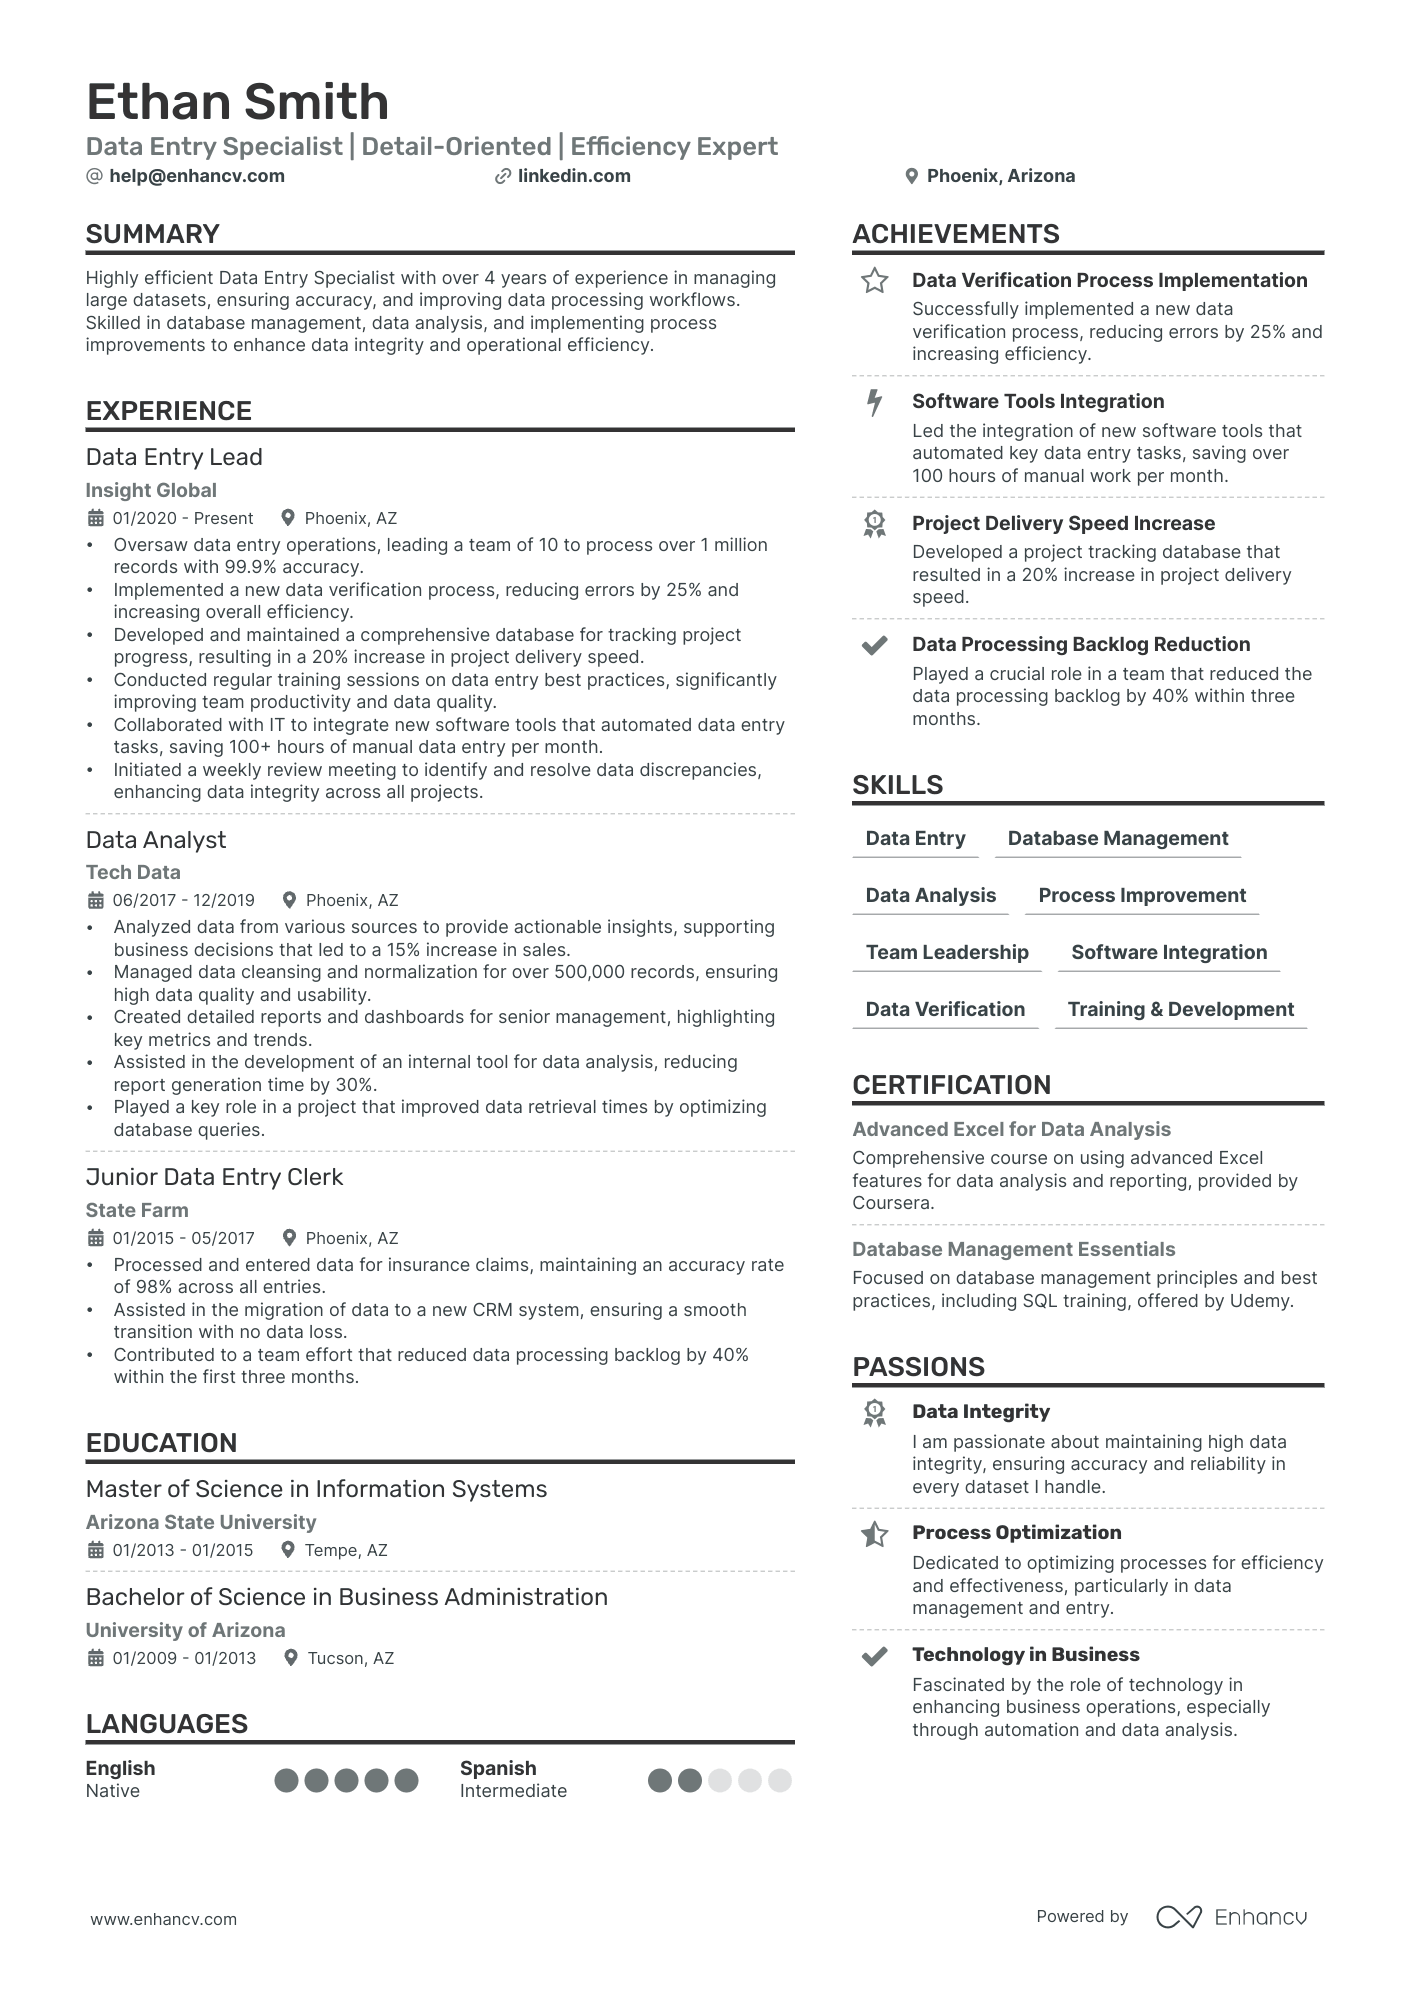 Data Entry resume example